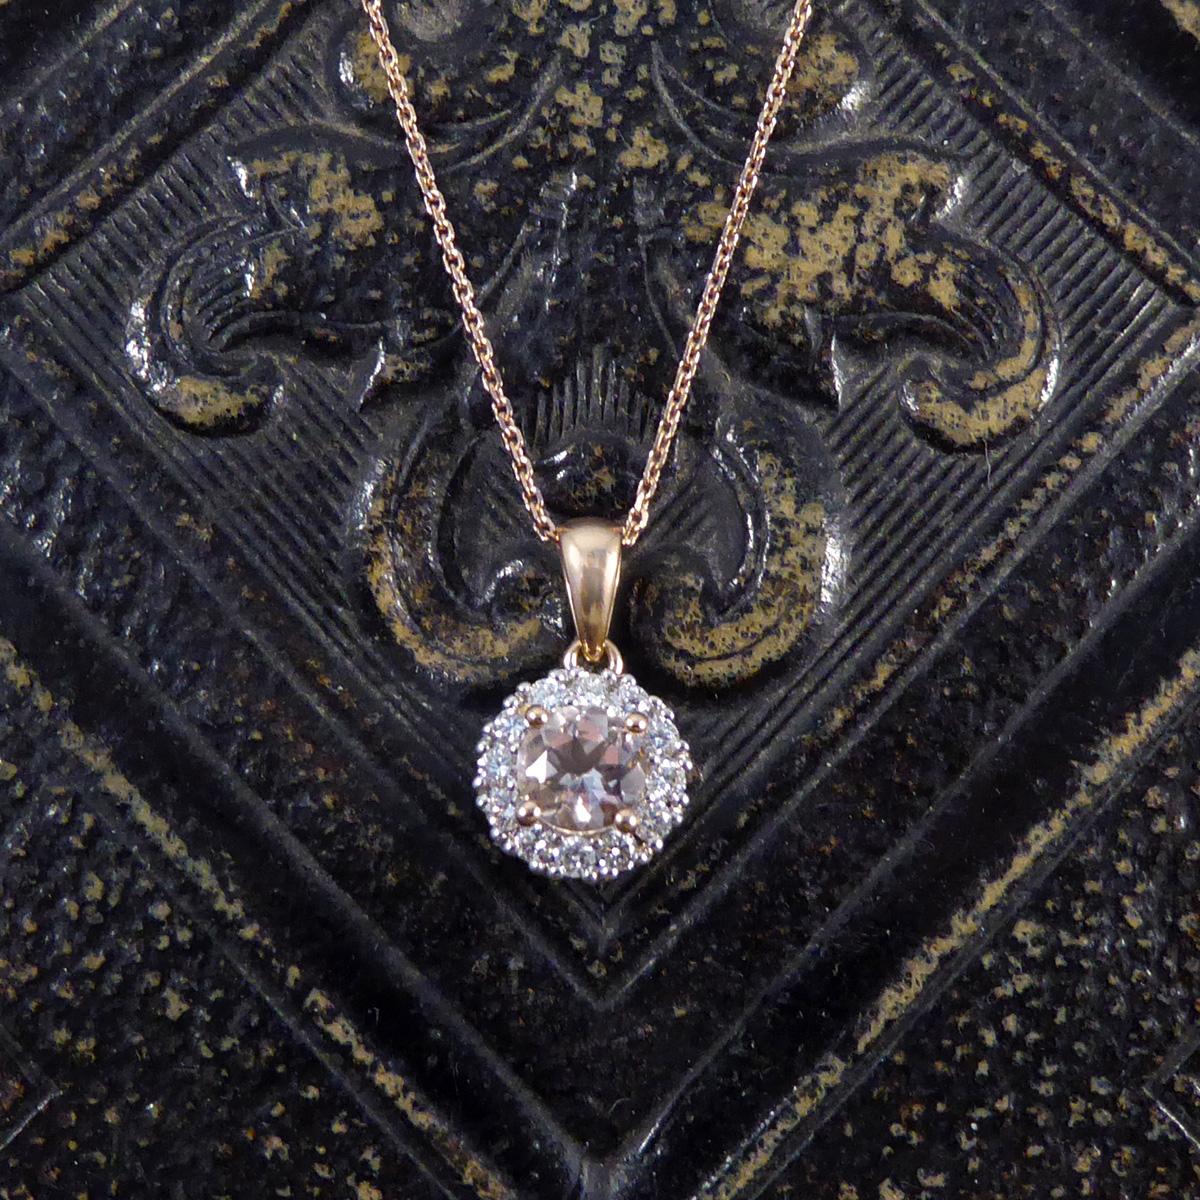 Pink Morganites are a member of the Beryl family along with Emeralds but with a pink hue, a very sought after gemstone. This gorgeous Morganite and Diamond pendant has been crafted in a halo style with a Morganite weighing 0.21ct in the centre